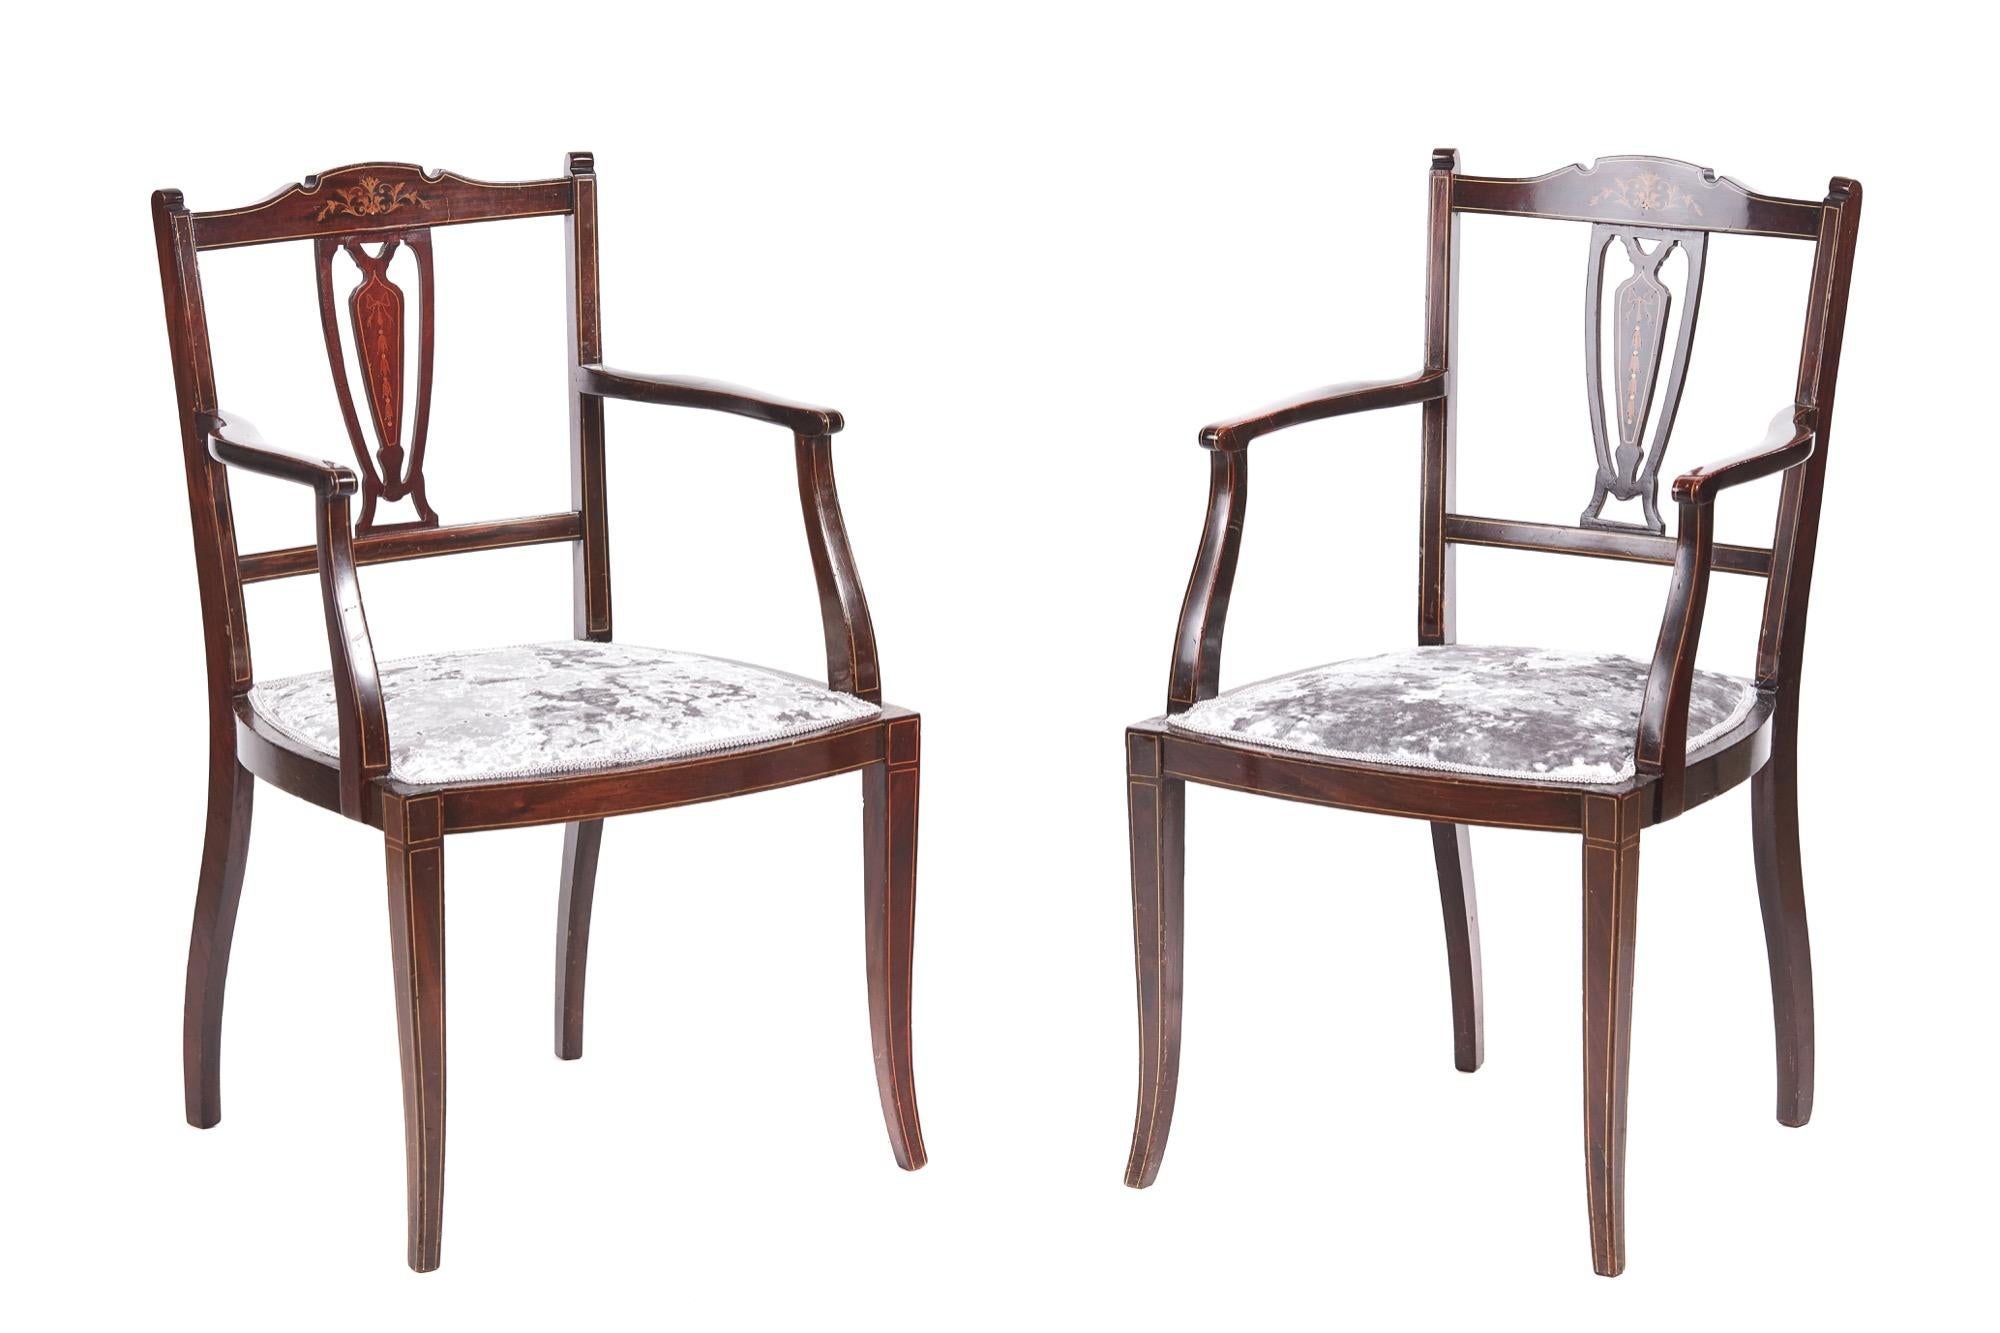 Pair of antique Edwardian mahogany inlaid armchairs with an elegant inlaid shaped top rail and centre splat. Newly recovered seats in a quality stylish fabric. They are supported by attractive shaped inlaid front legs and outswept back legs
 
In